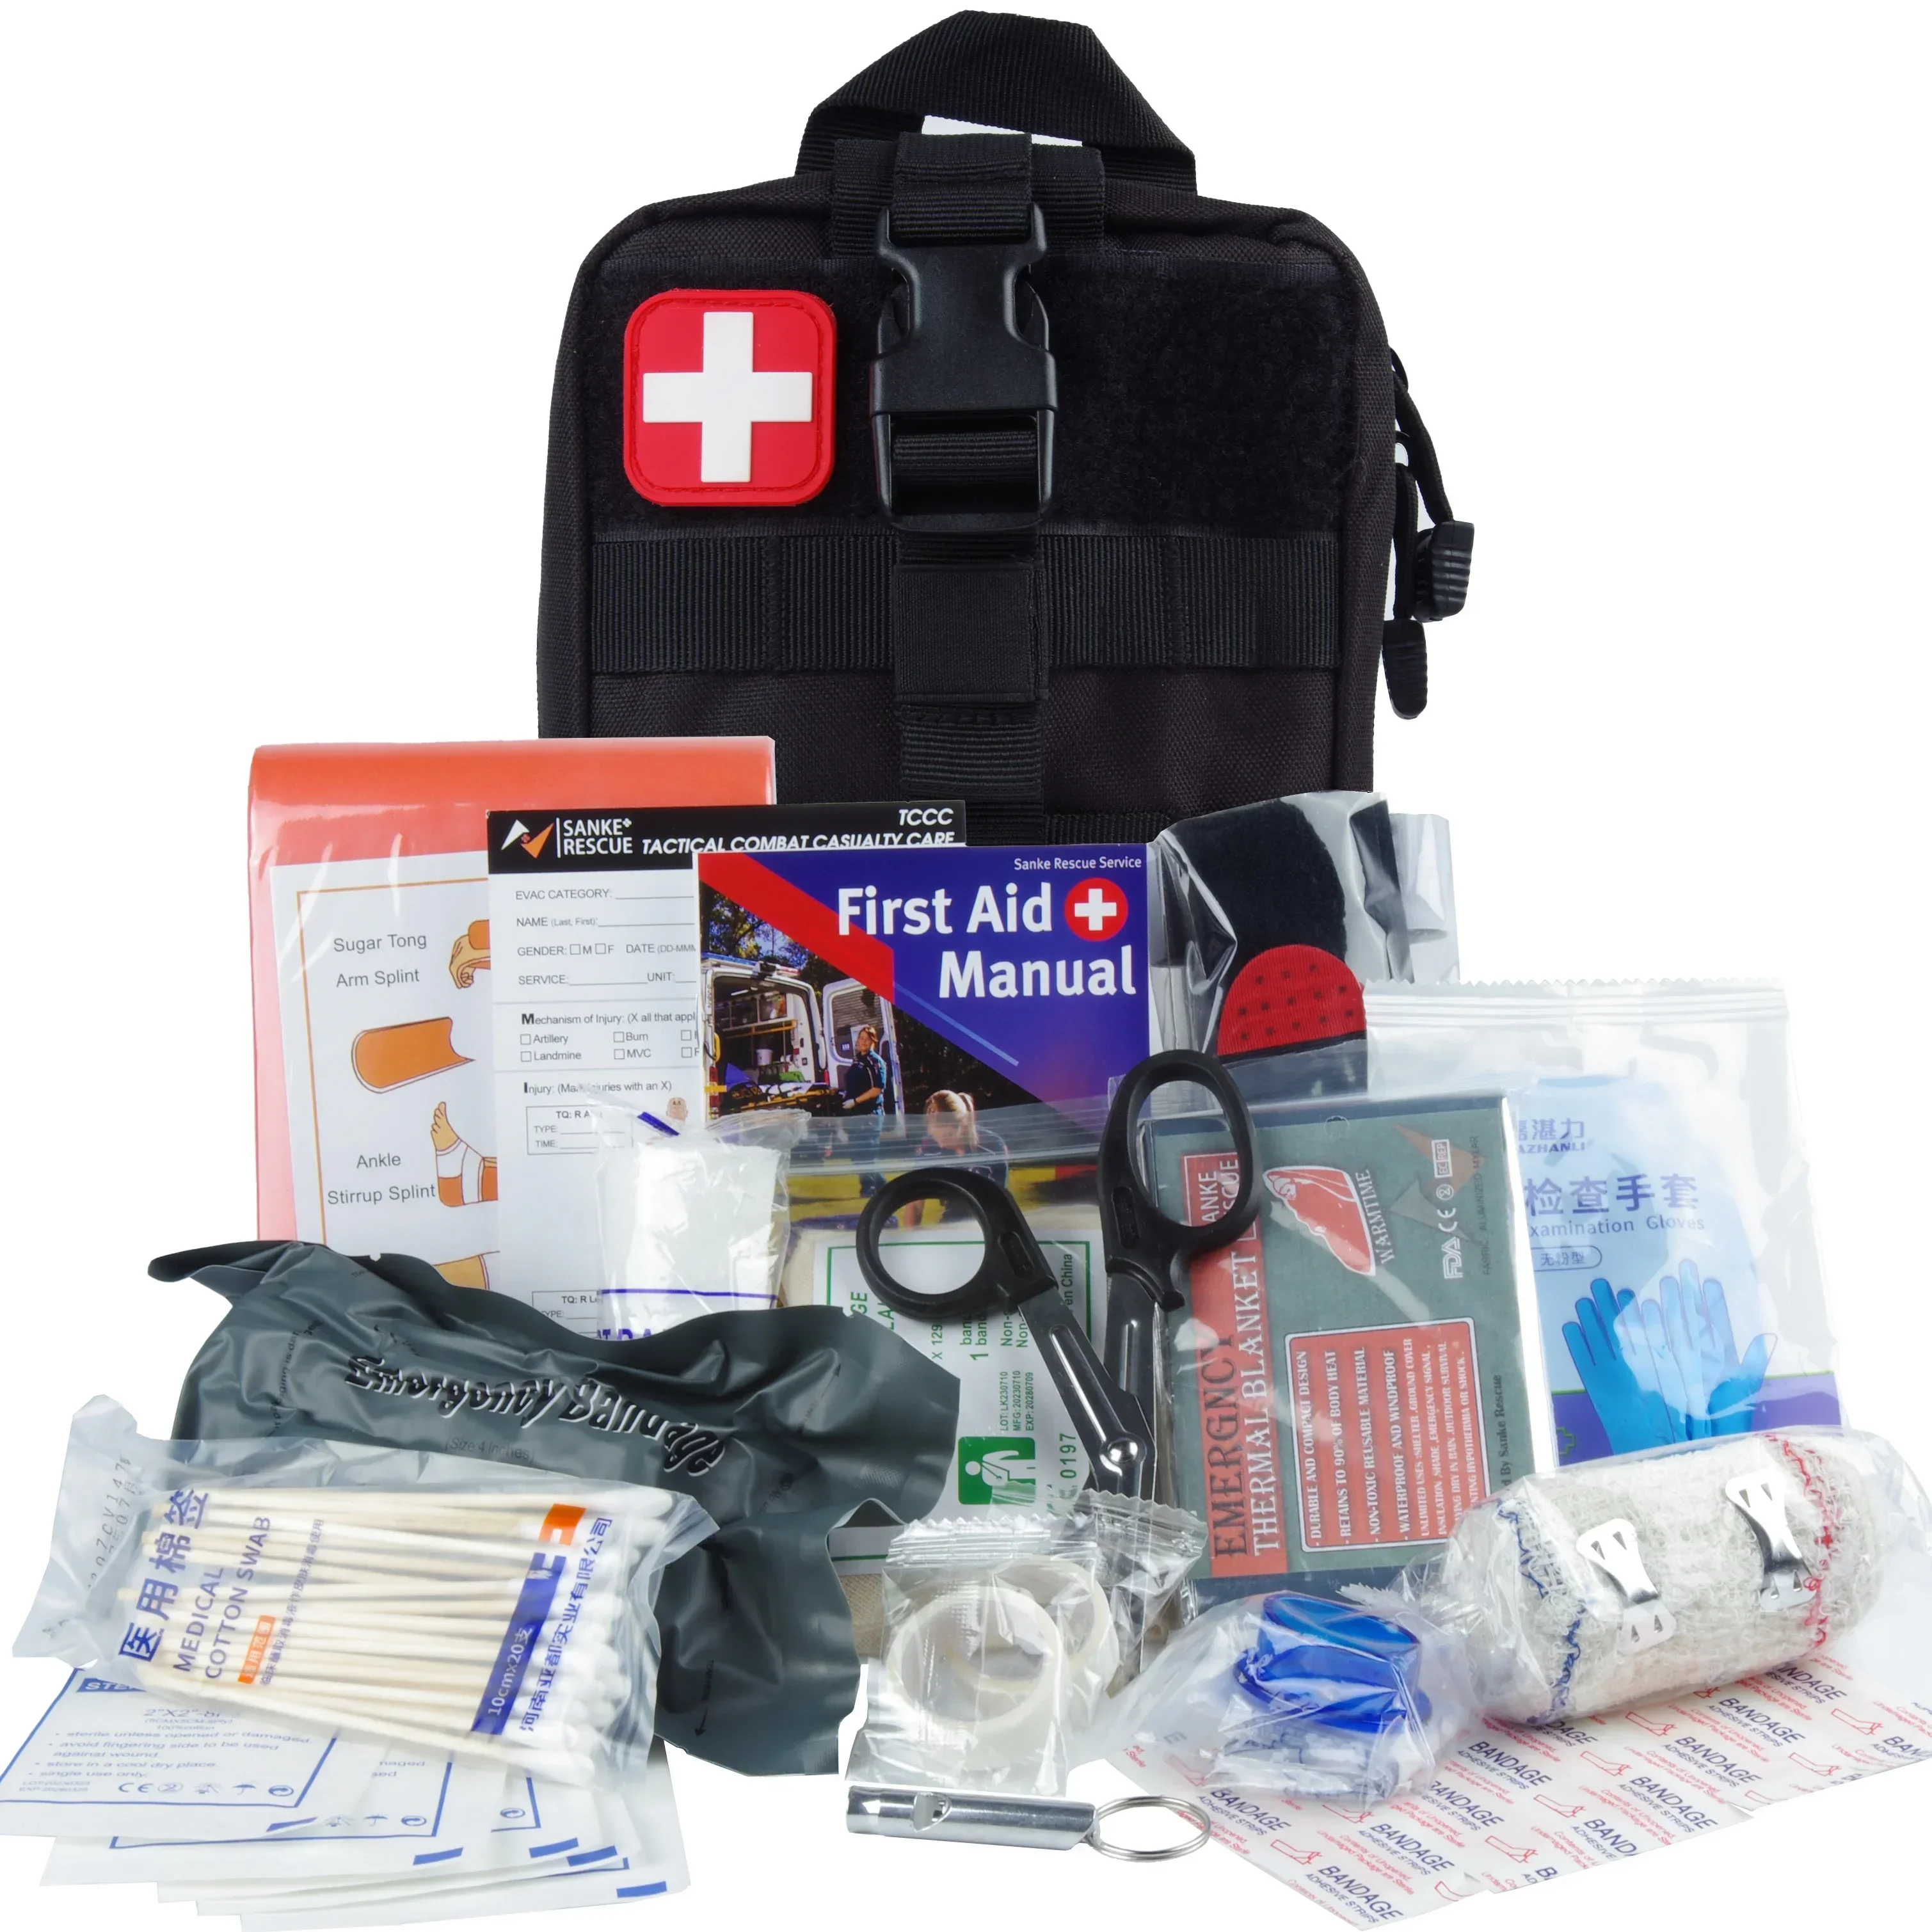 Survival First Aid Kit Survival Military Full Set Molle Outdoor Gear Emergency - £37.88 GBP